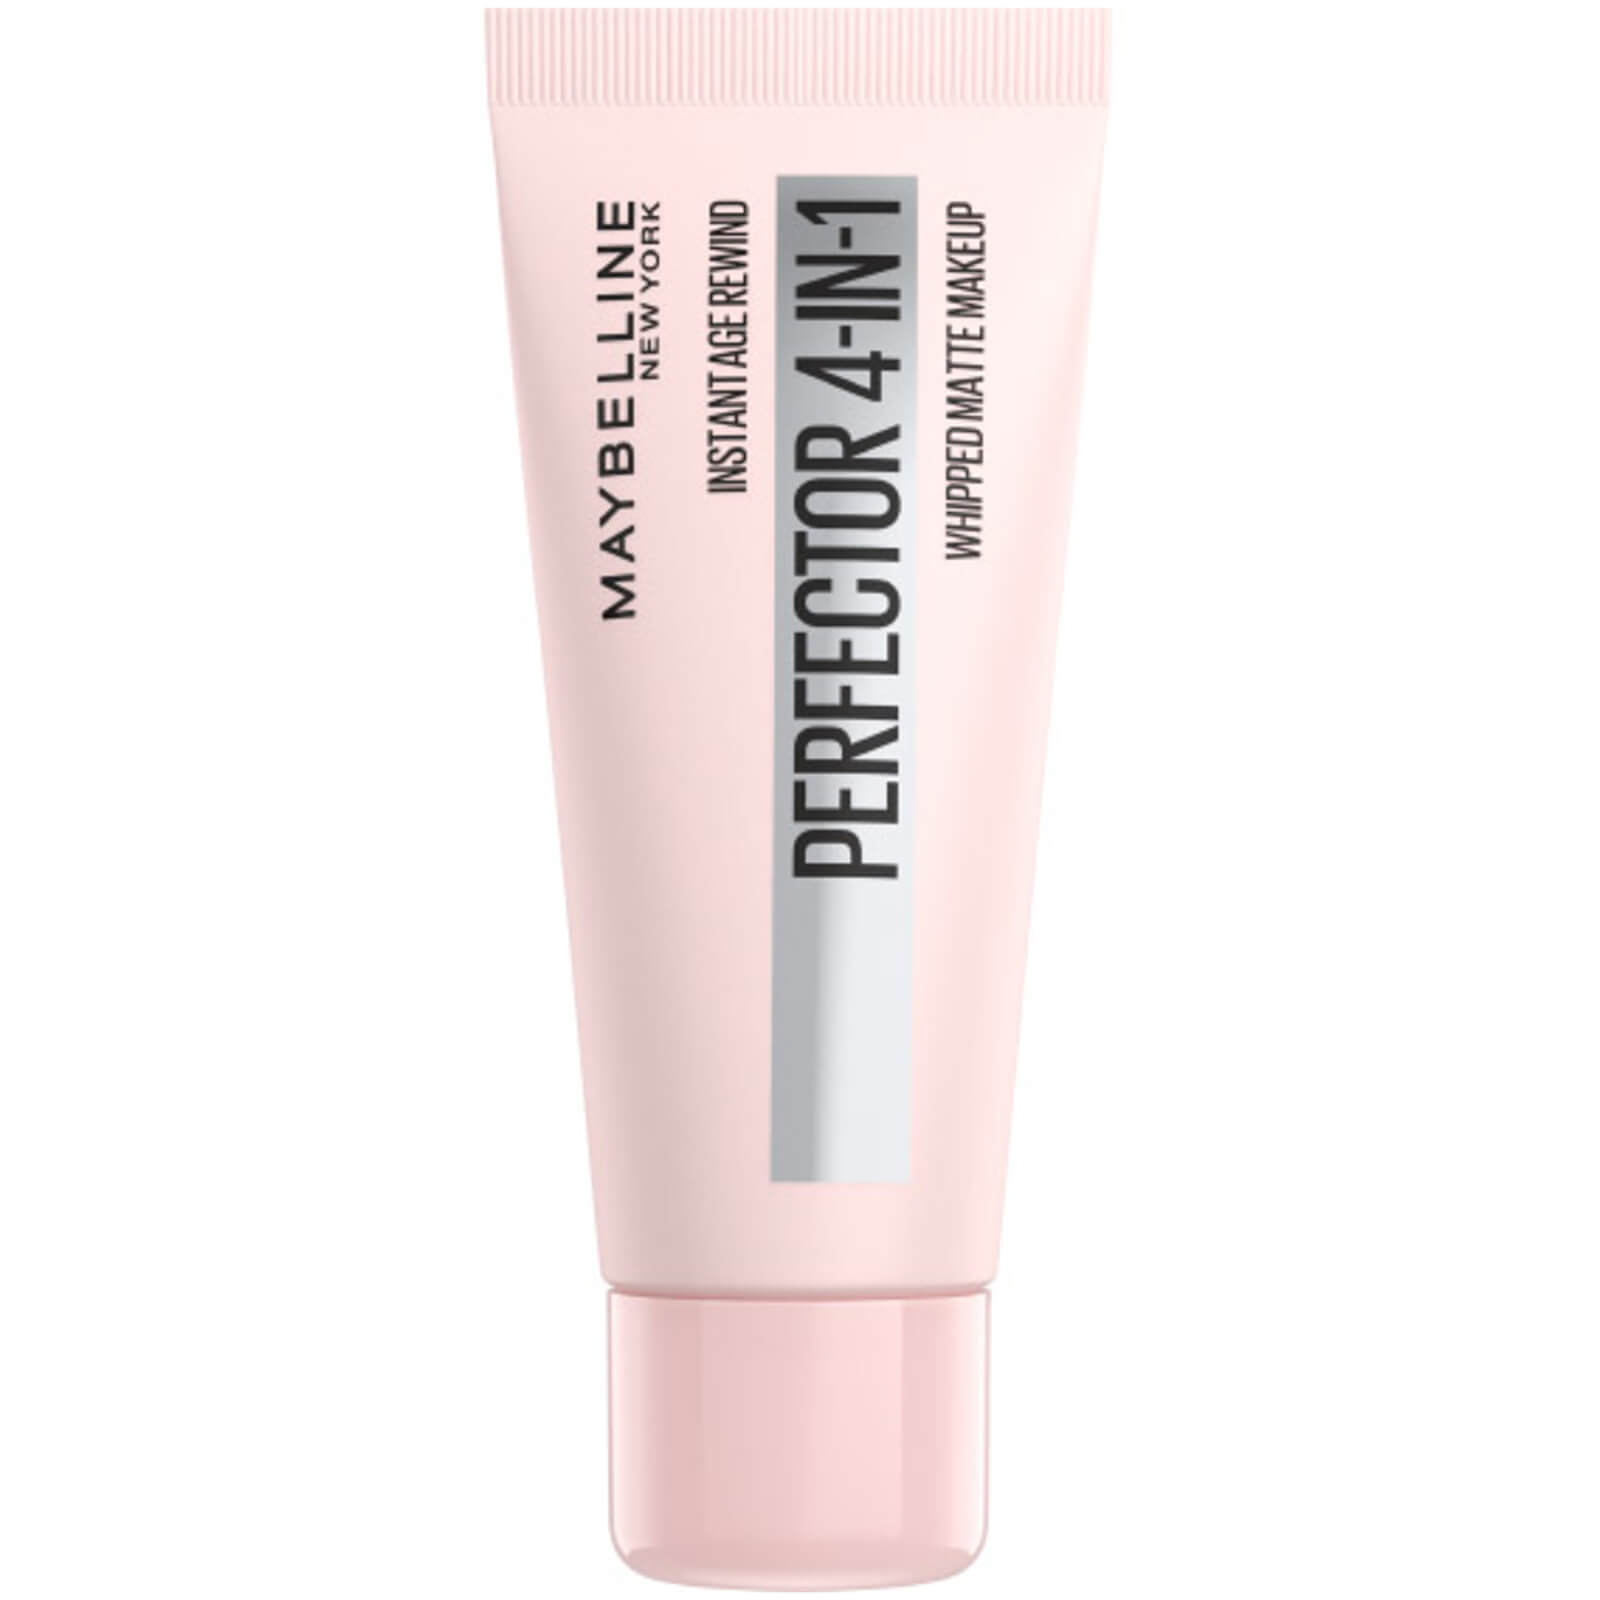 Maybelline Instant Age Rewind Instant Perfector 4-in-1 20ml (Various Shades) - Light